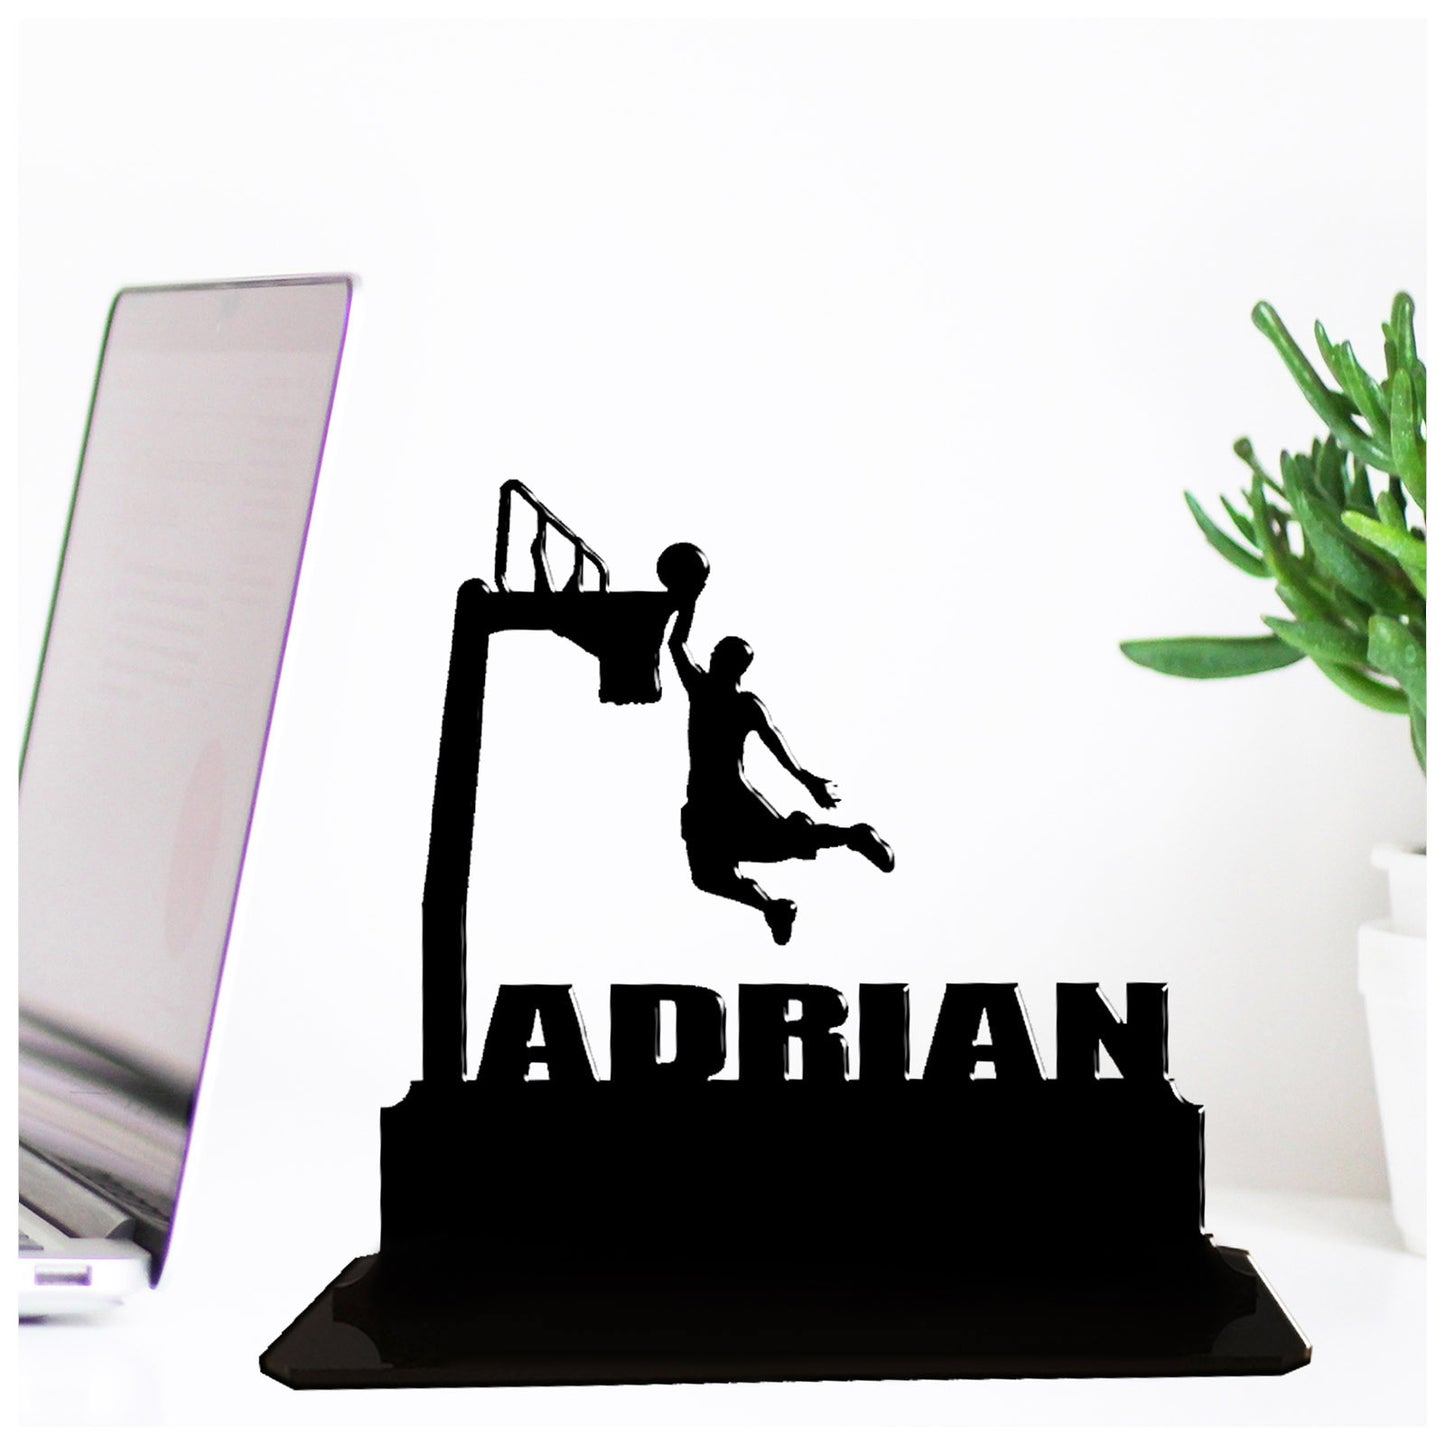 Personalised acrylic basketball player birthday gift for him. This standalone present is keepsake ornamental plaque.